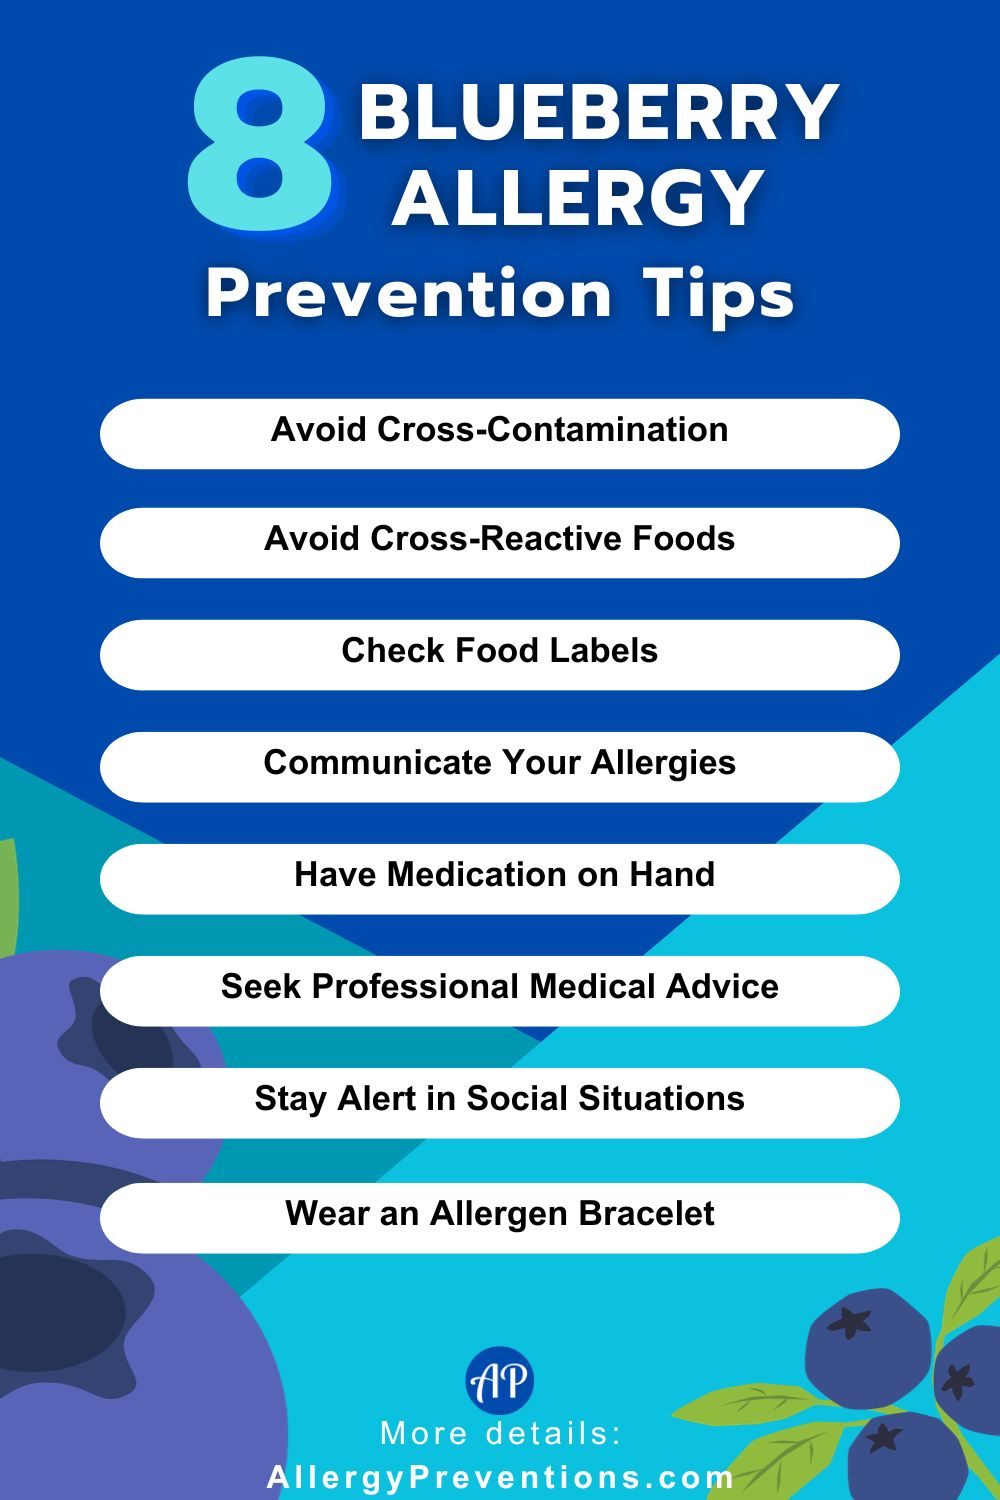 Blueberry allergy prevention tips infographic. Avoid Cross-Contamination, Avoid Cross-Reactive Foods, Check Food Labels, Communicate Your Allergies Have Medication on Hand, Seek Professional Medical Advice, Stay Alert in Social Situations, Wear an Allergen Bracelet.